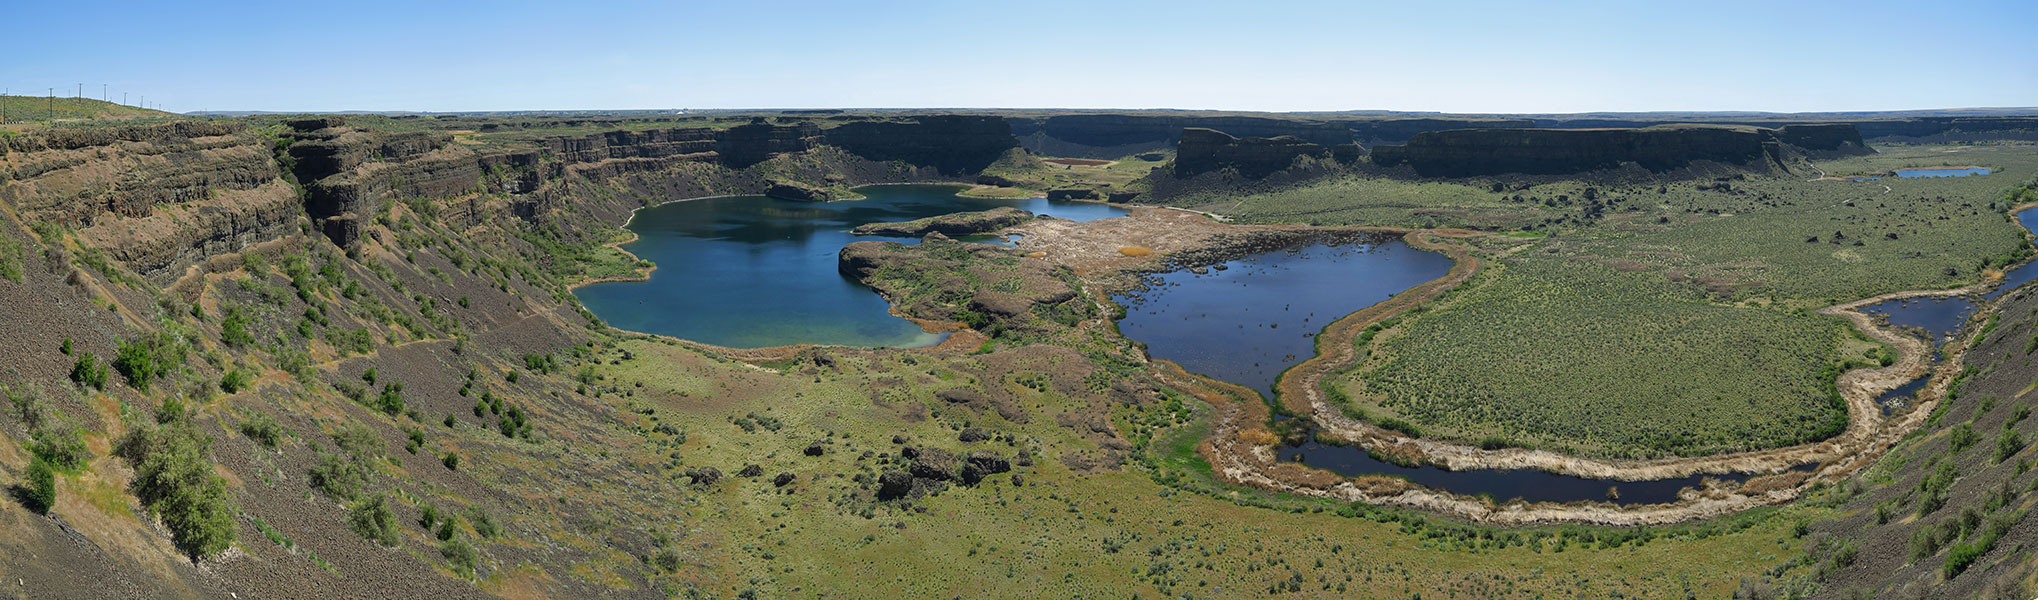 Grand Coulee & Dry Falls panorama [Dry Falls Overlook, Sun Lakes/Dry Falls State Park, Washington]